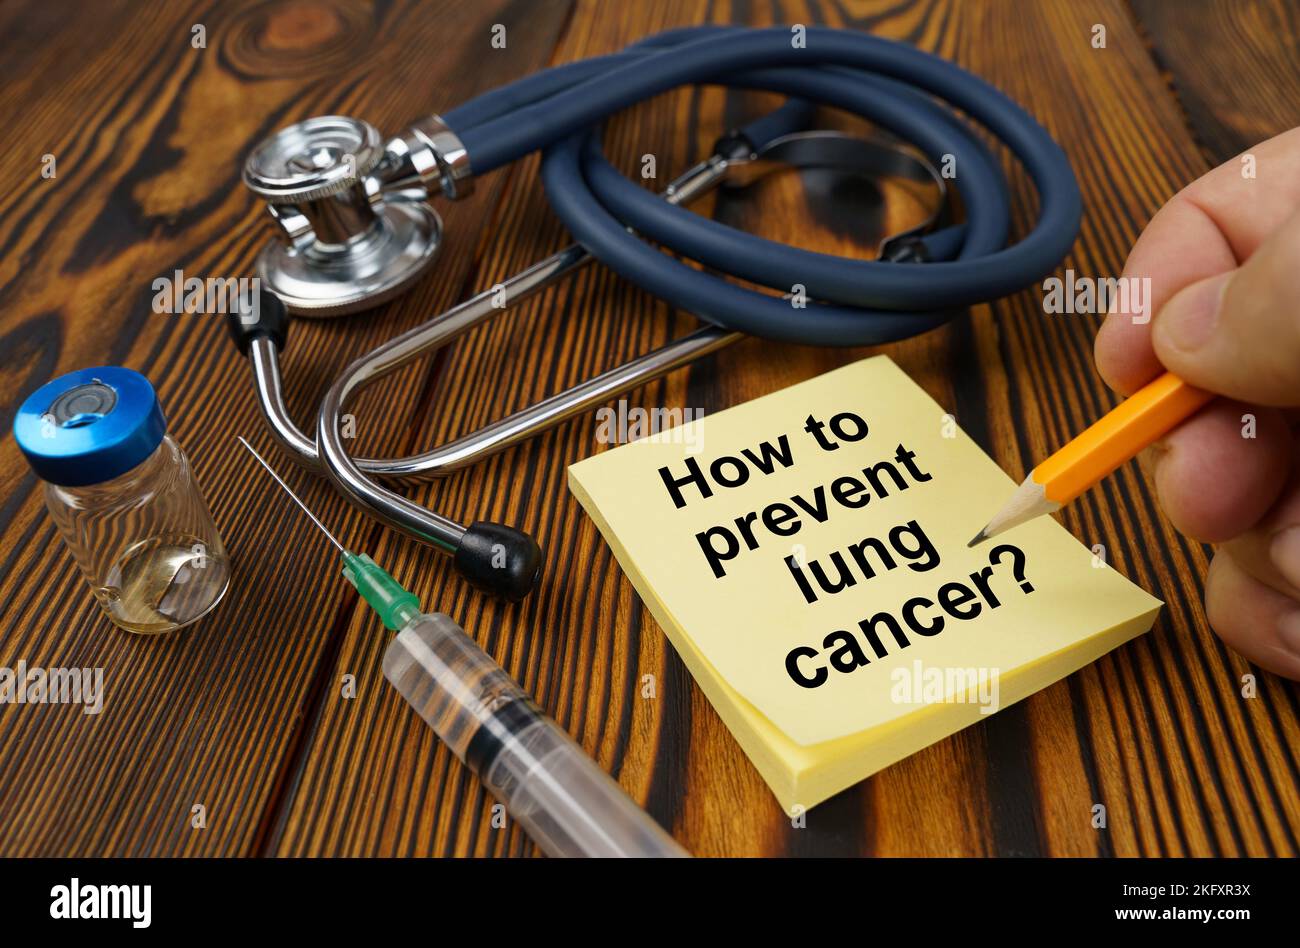 Medical concept. On the table is a stethoscope, a syringe, a man's hand with a pen makes an inscription on a sticker - How to Prevent Lung Cancer Stock Photo